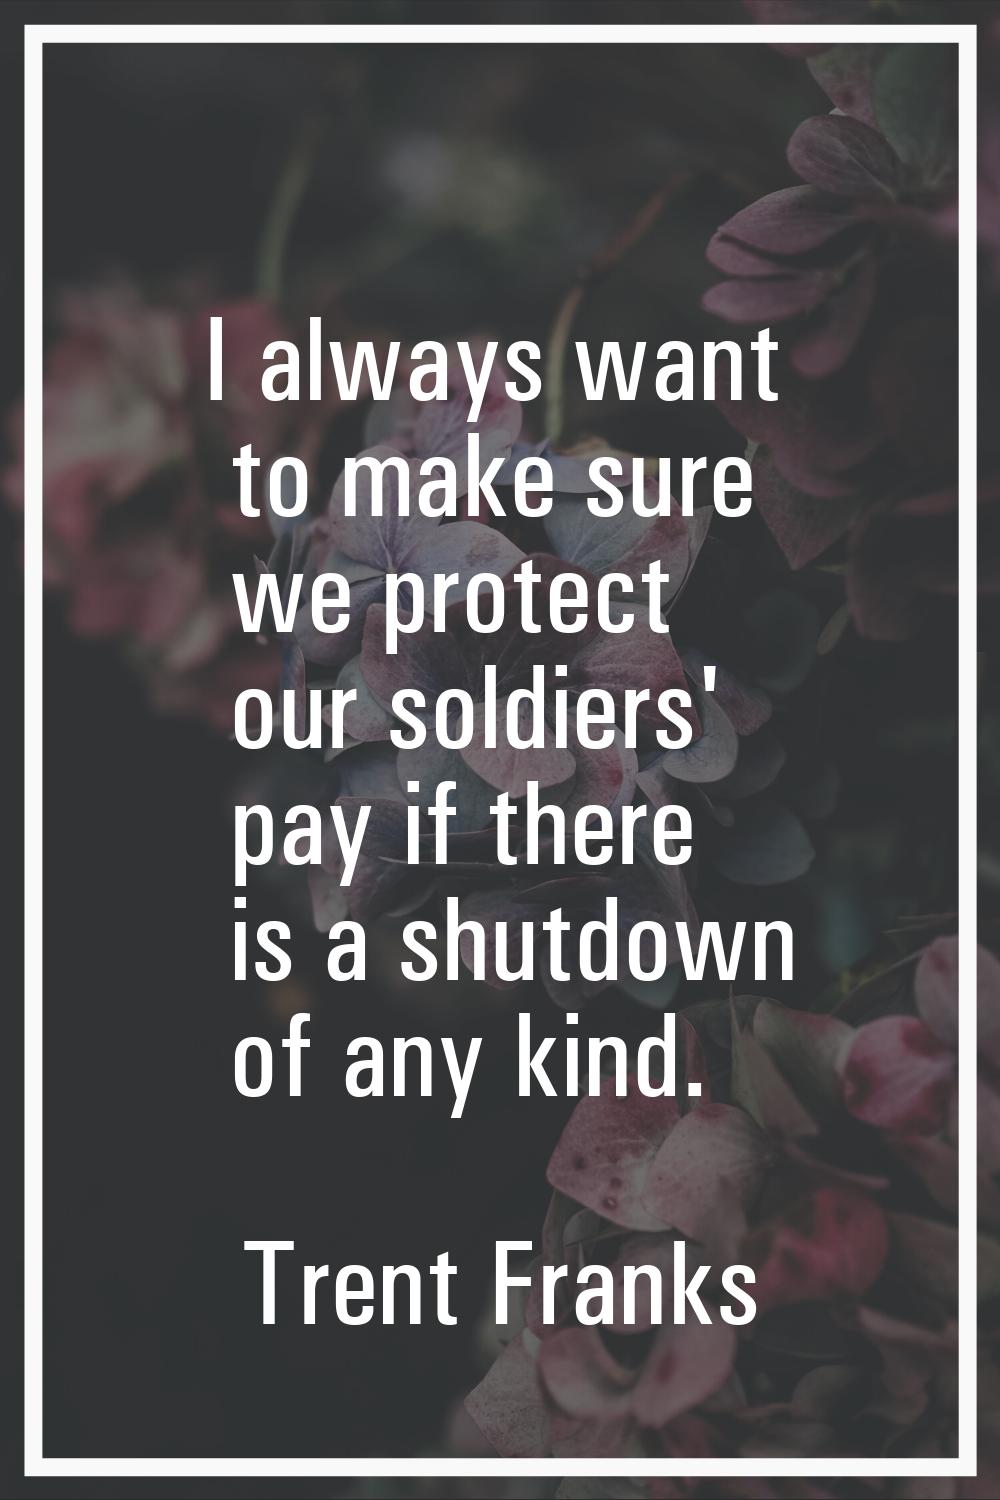 I always want to make sure we protect our soldiers' pay if there is a shutdown of any kind.